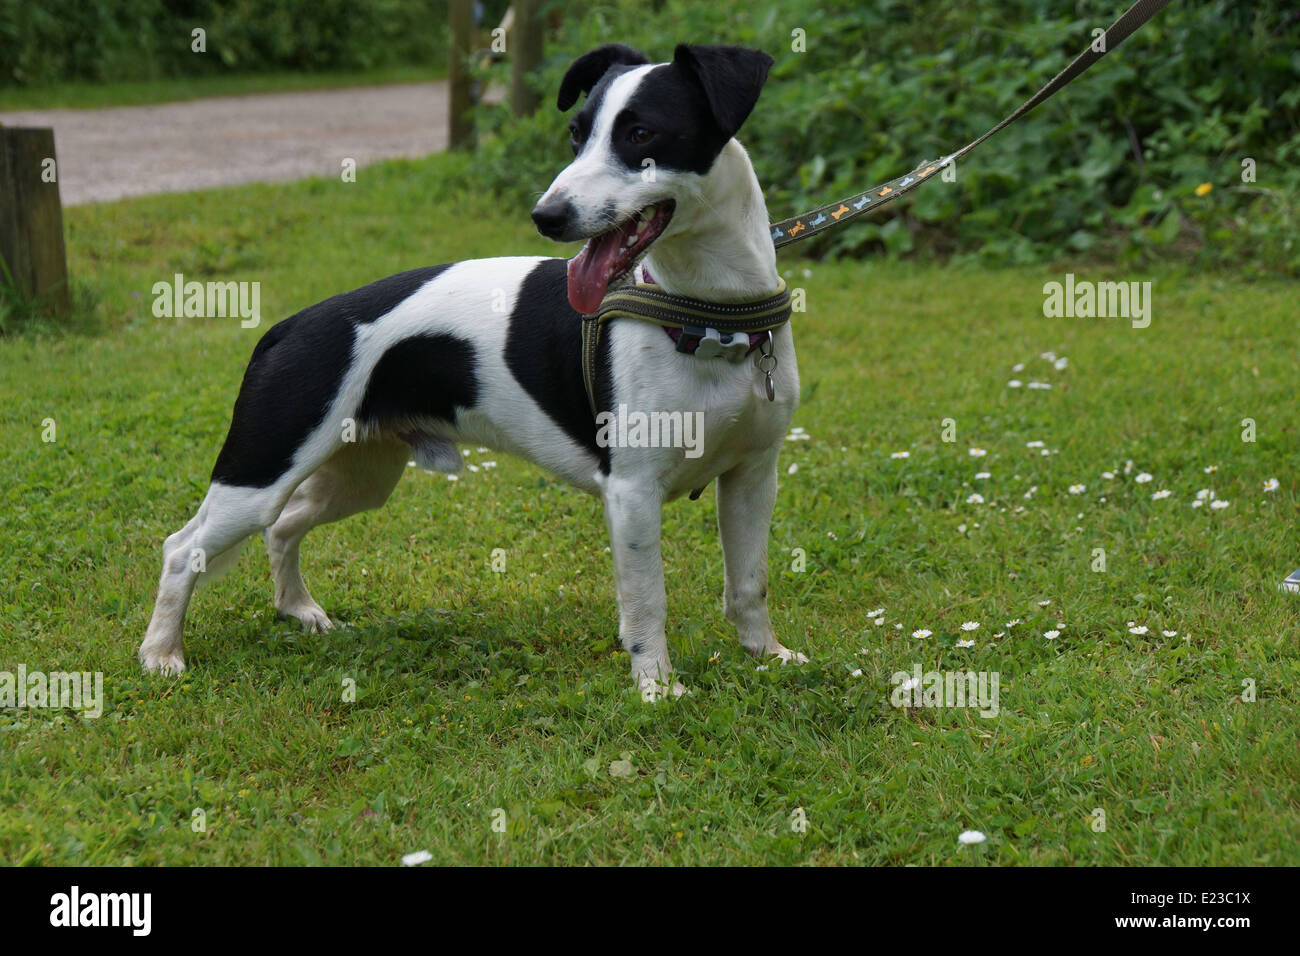 Black and white Lurcher/Jack Russell cross breed standing Stock Photo